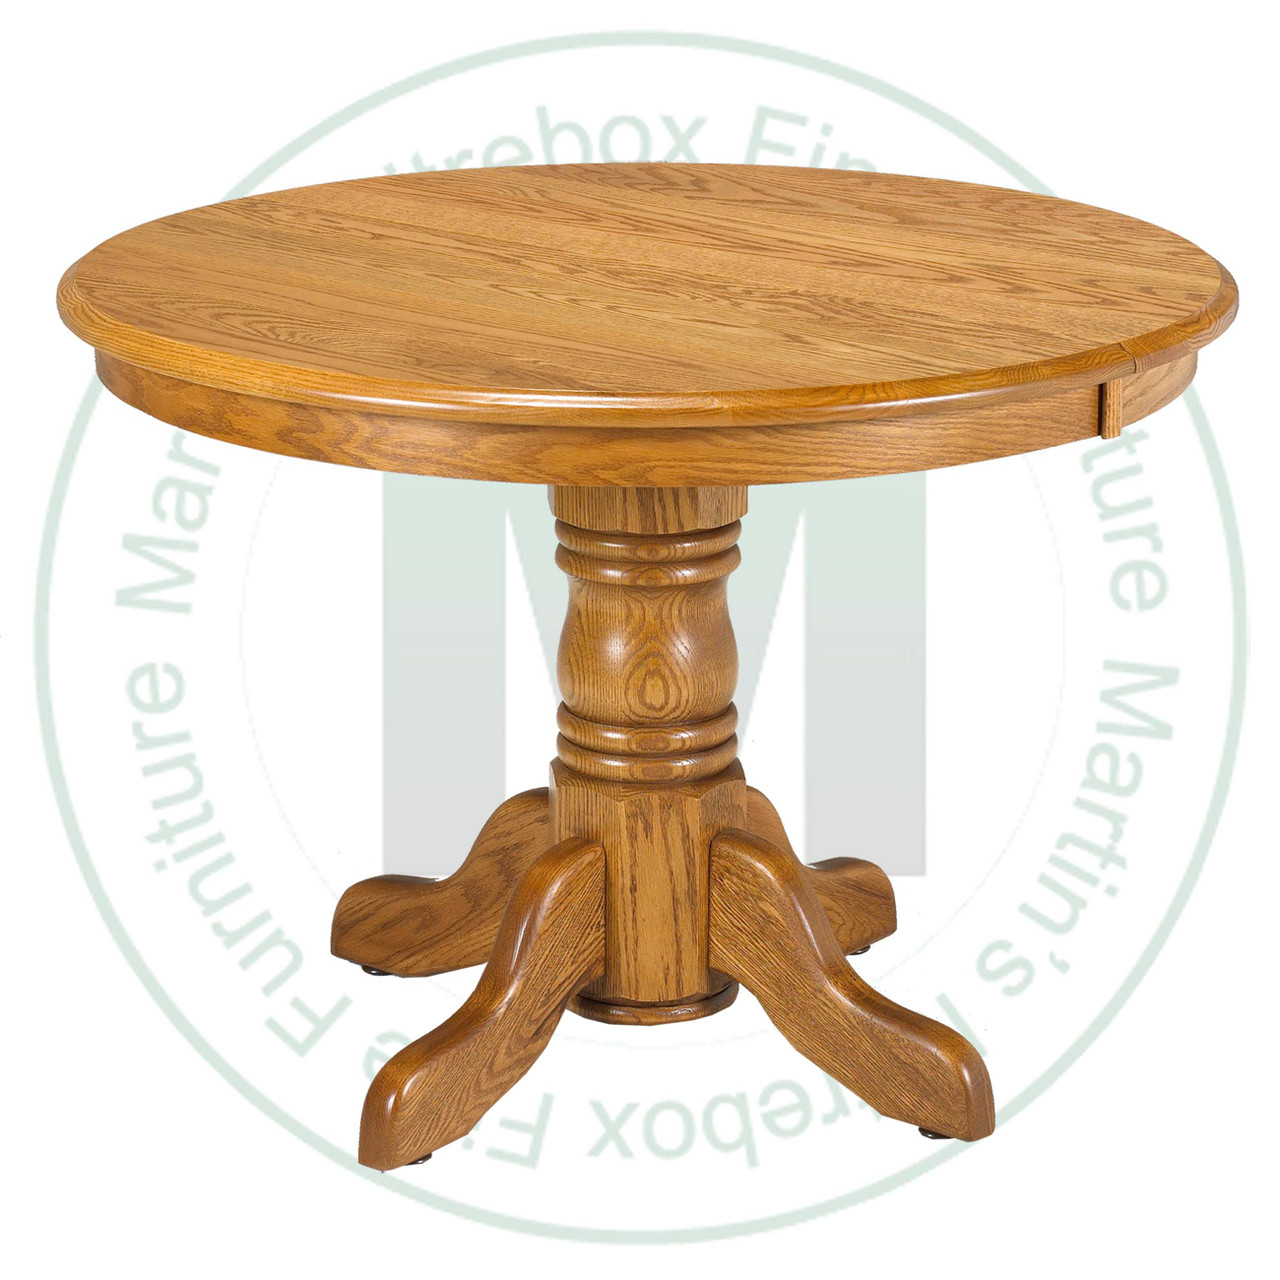 Maple Lancaster Collection Single Pedestal Table 48''D x 48''W x 30''H Round Solid Table. Table Has 1'' Thick Top